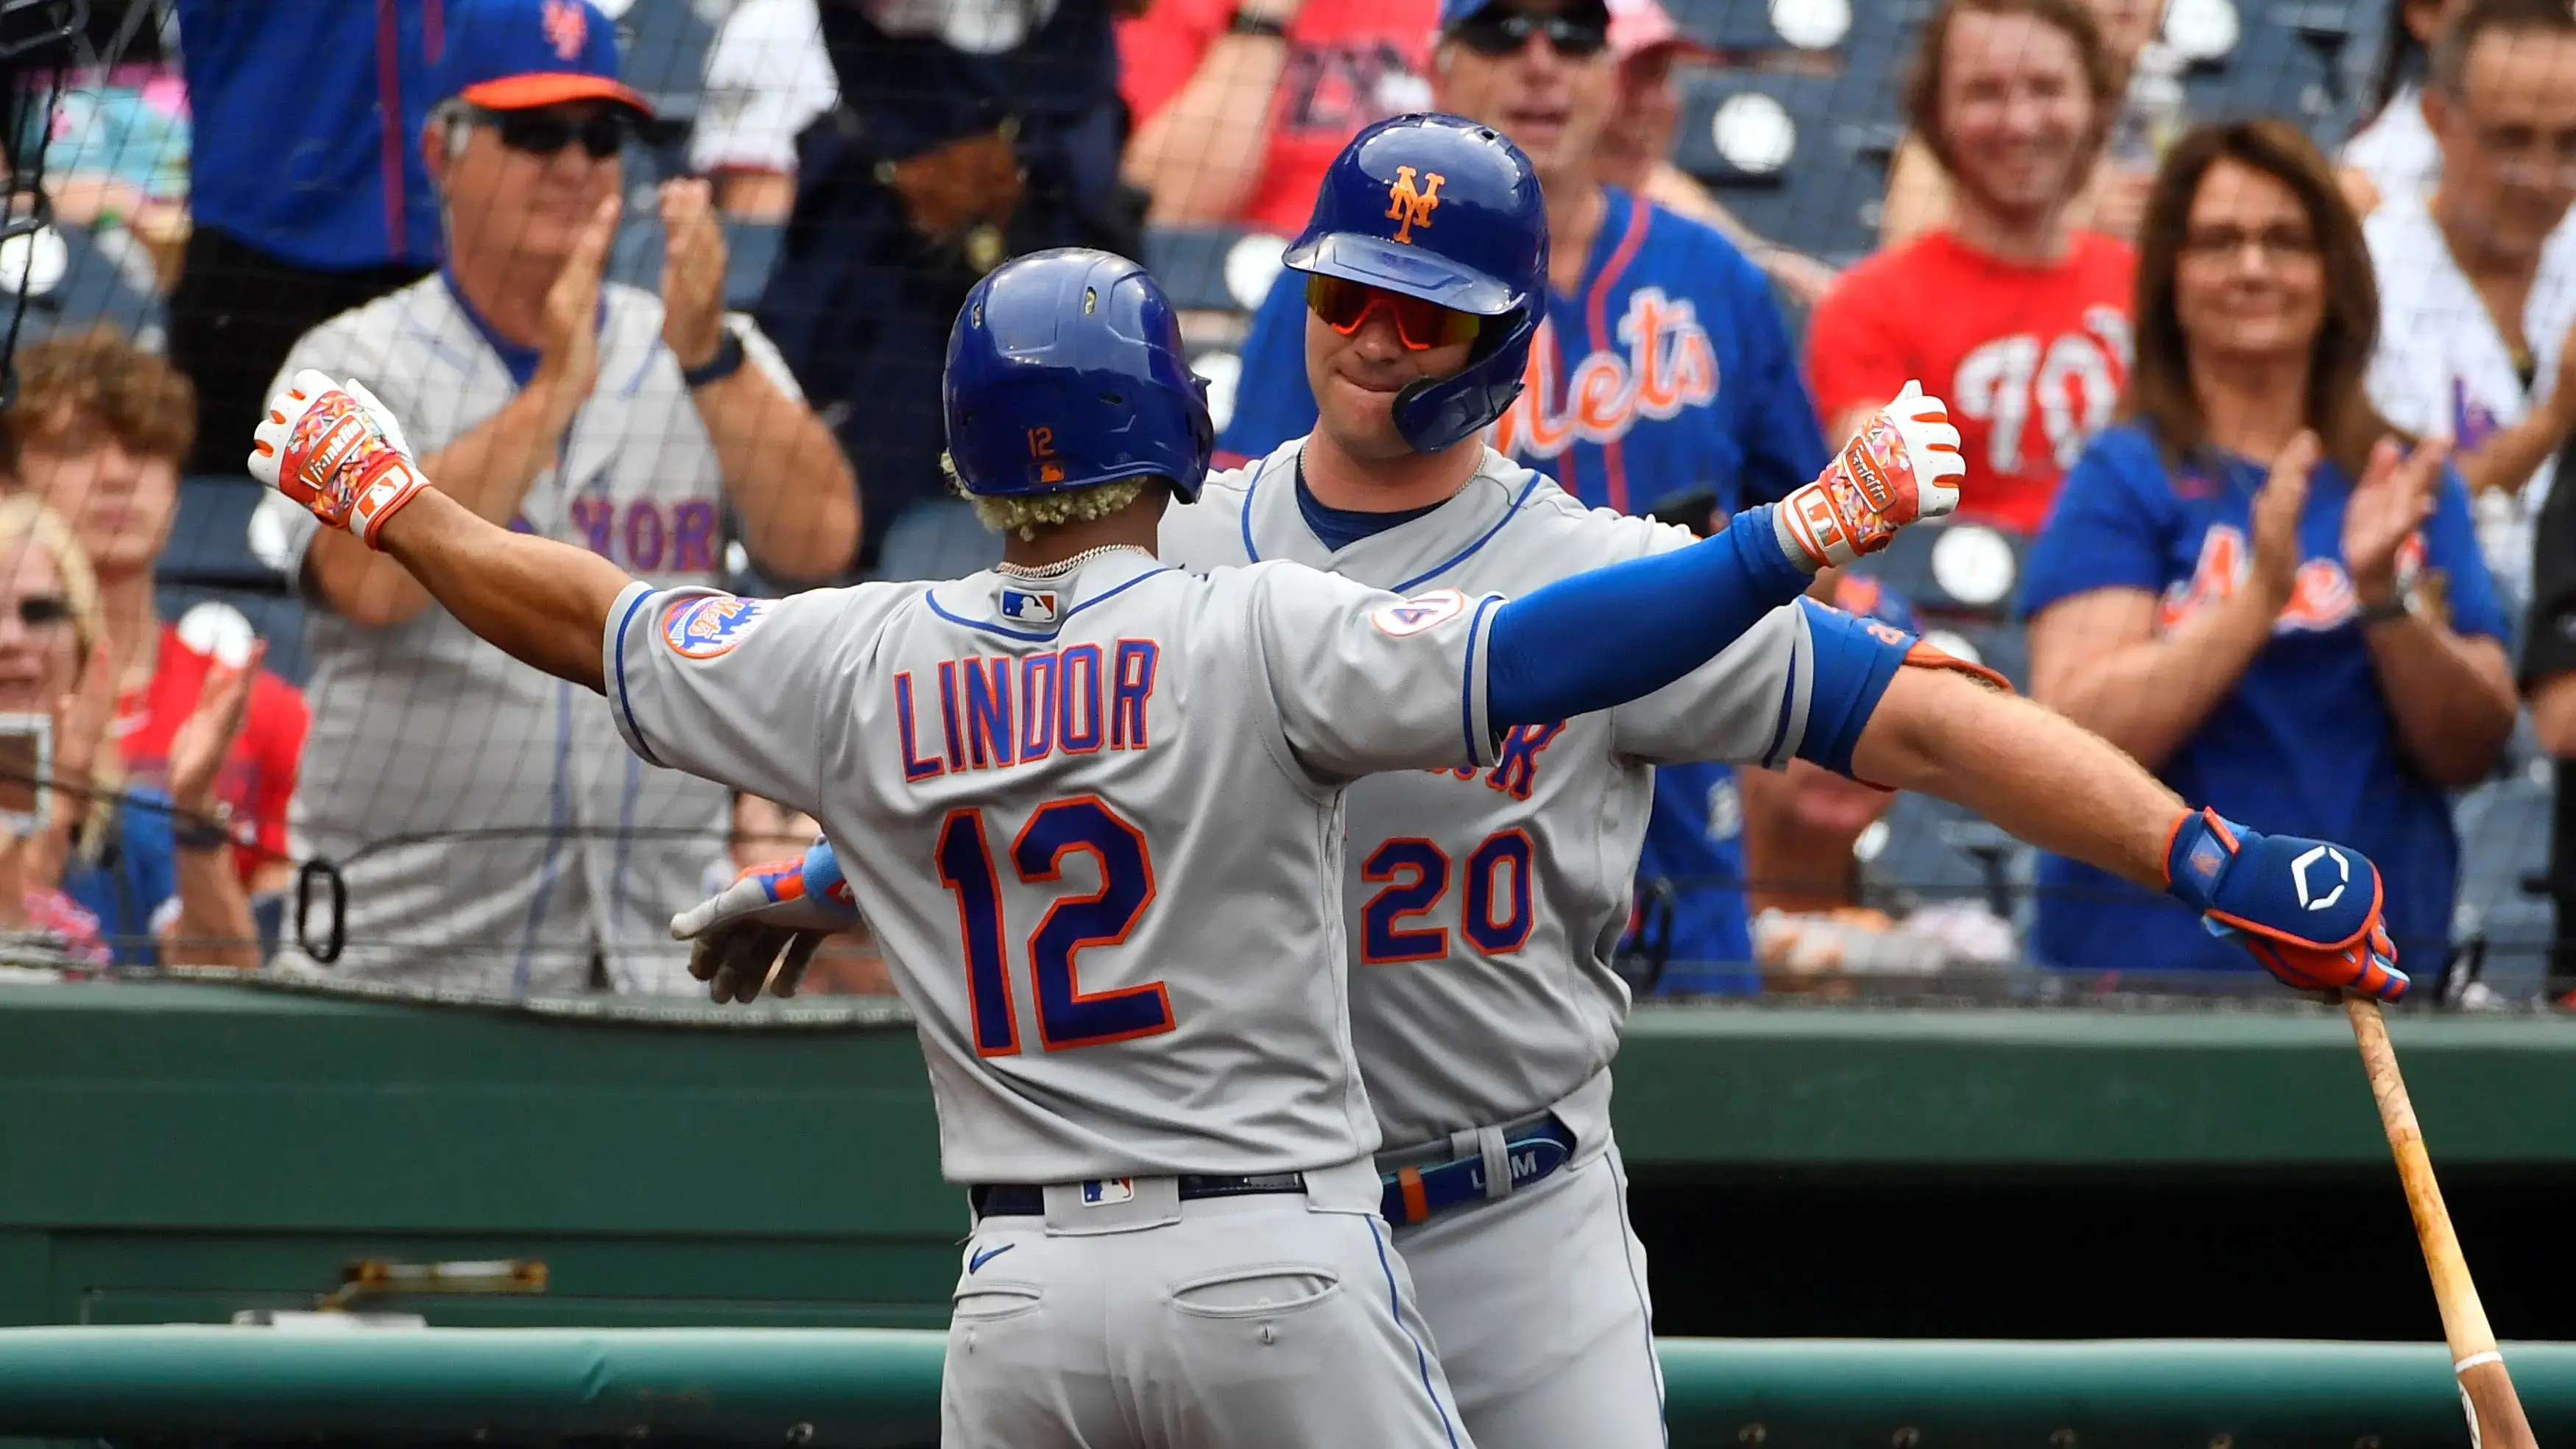 Jun 19, 2021; Washington, District of Columbia, USA; New York Mets shortstop Francisco Lindor (12) is congratulated by first baseman Pete Alonso (20) after hitting a two run home run against the Washington Nationals during the first inning at Nationals Park. Mandatory Credit: Brad Mills-USA TODAY Sports / Brad Mills-USA TODAY Sports